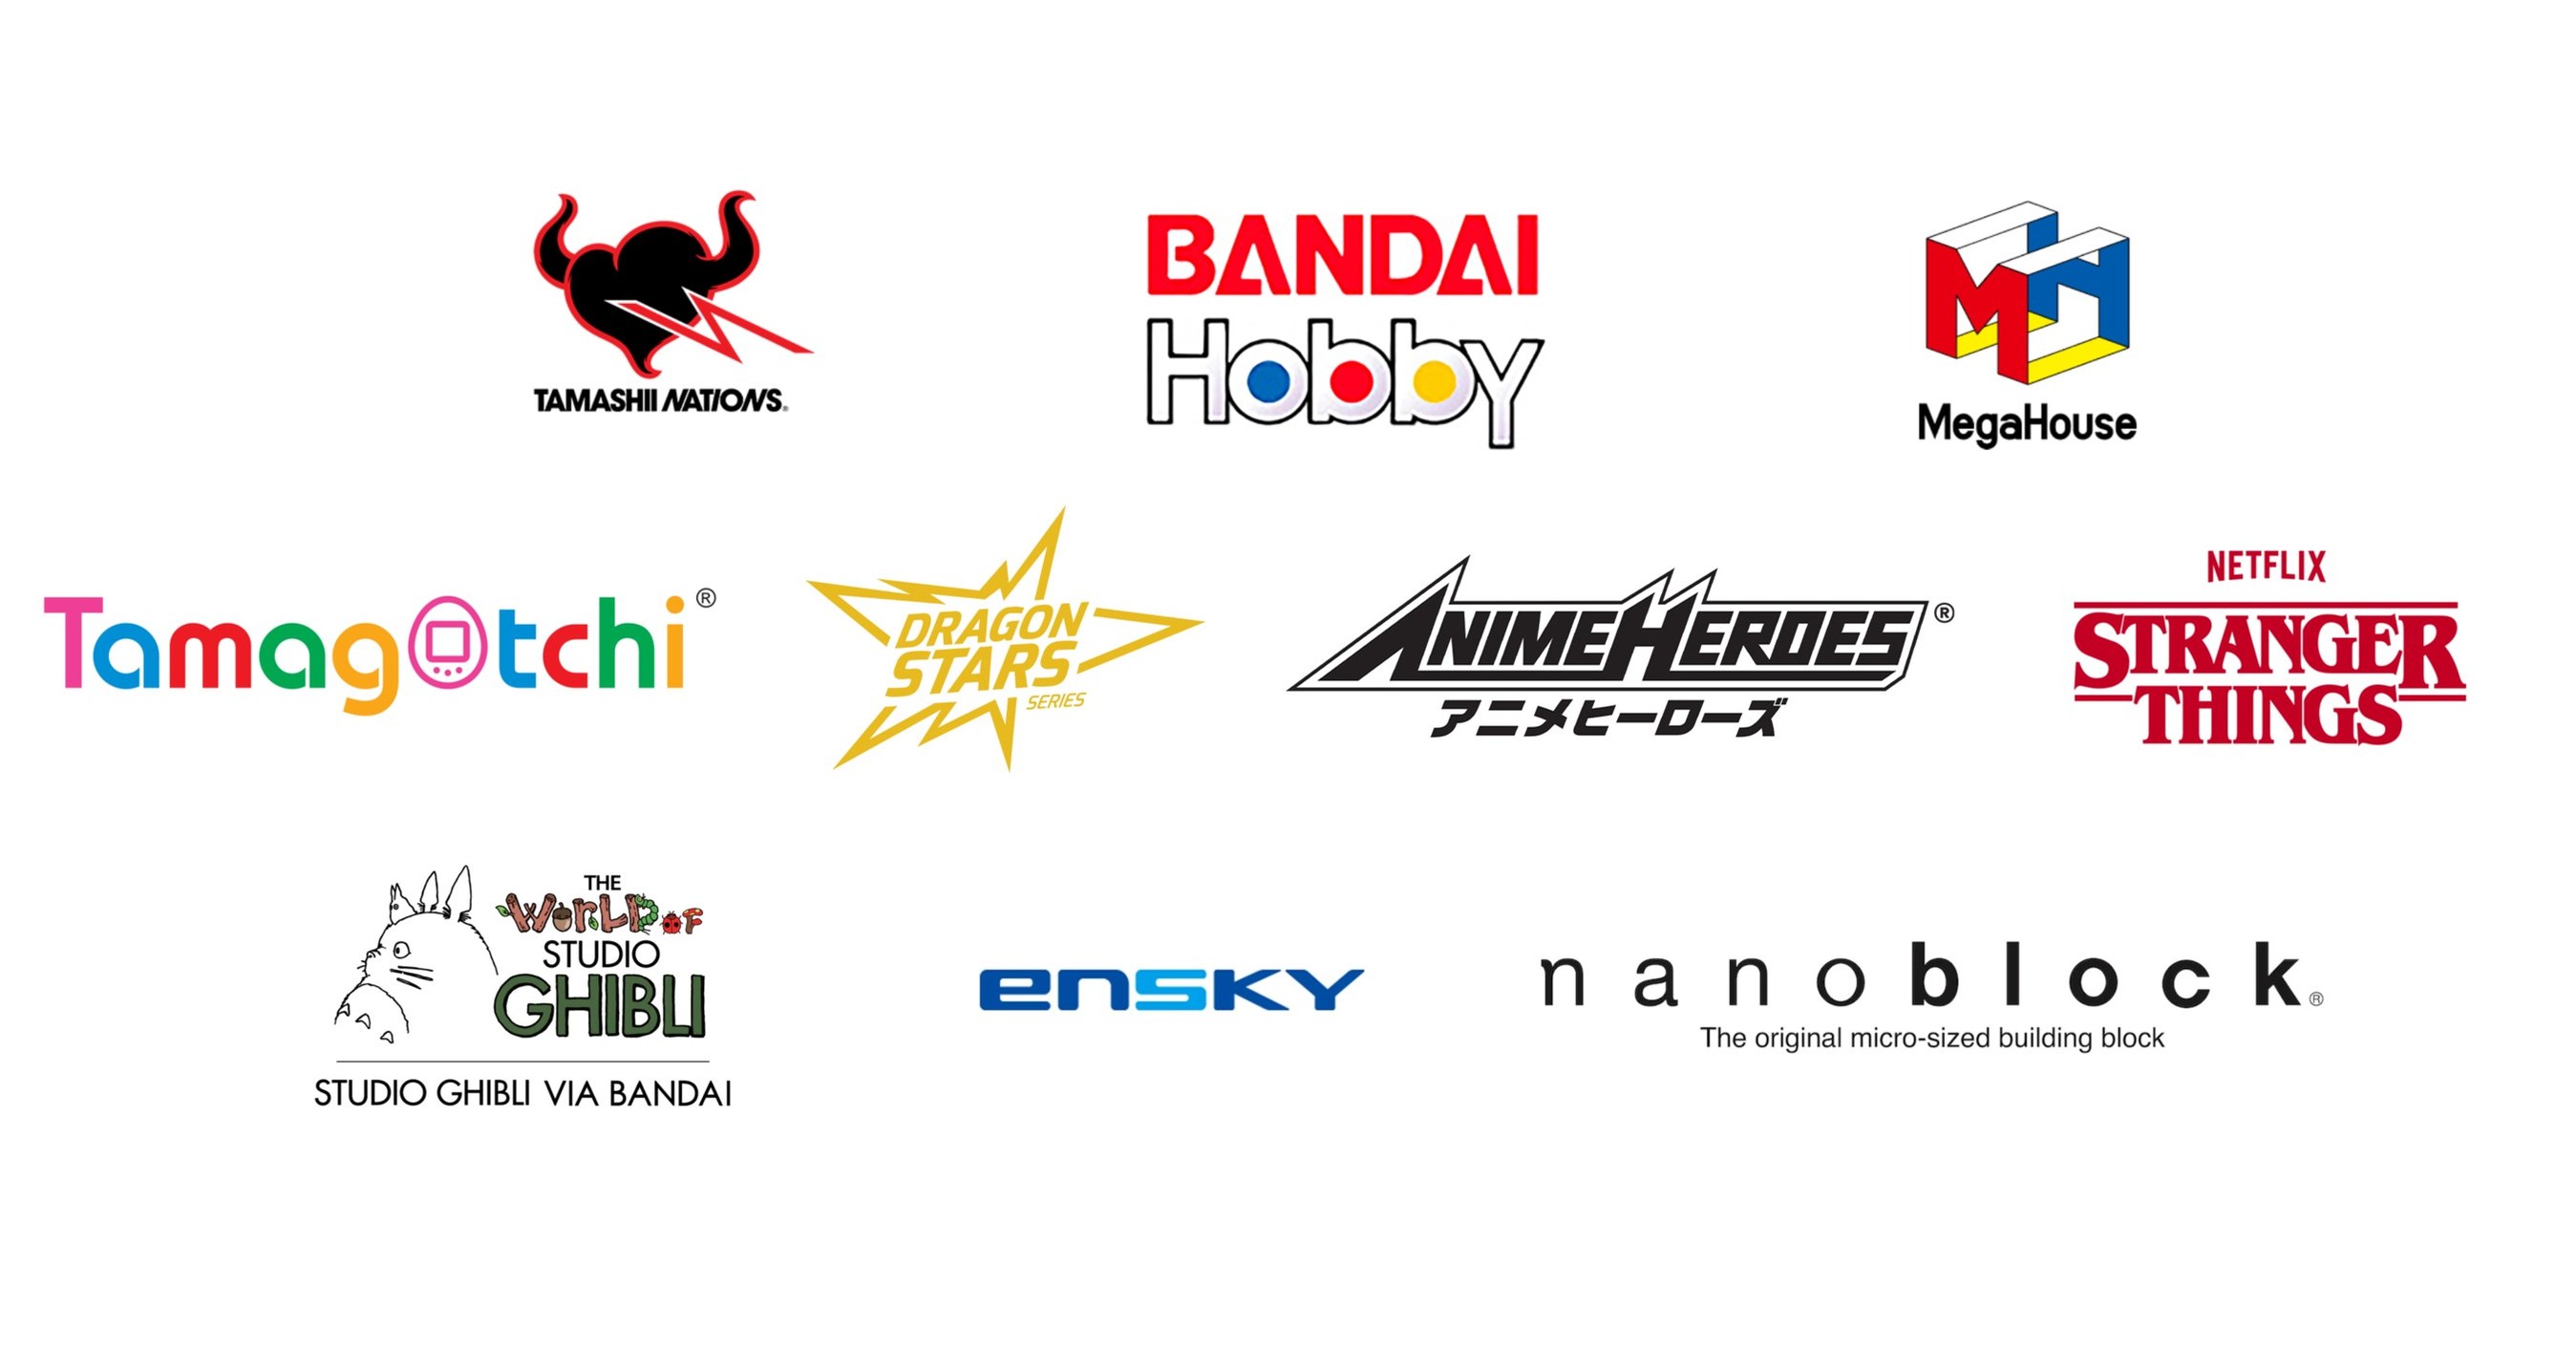 BANDAI NAMCO TOYS & COLLECTIBLES AMERICA BRINGS ITS LARGEST ACTIVATIONS TO  NEW YORK COMIC CON